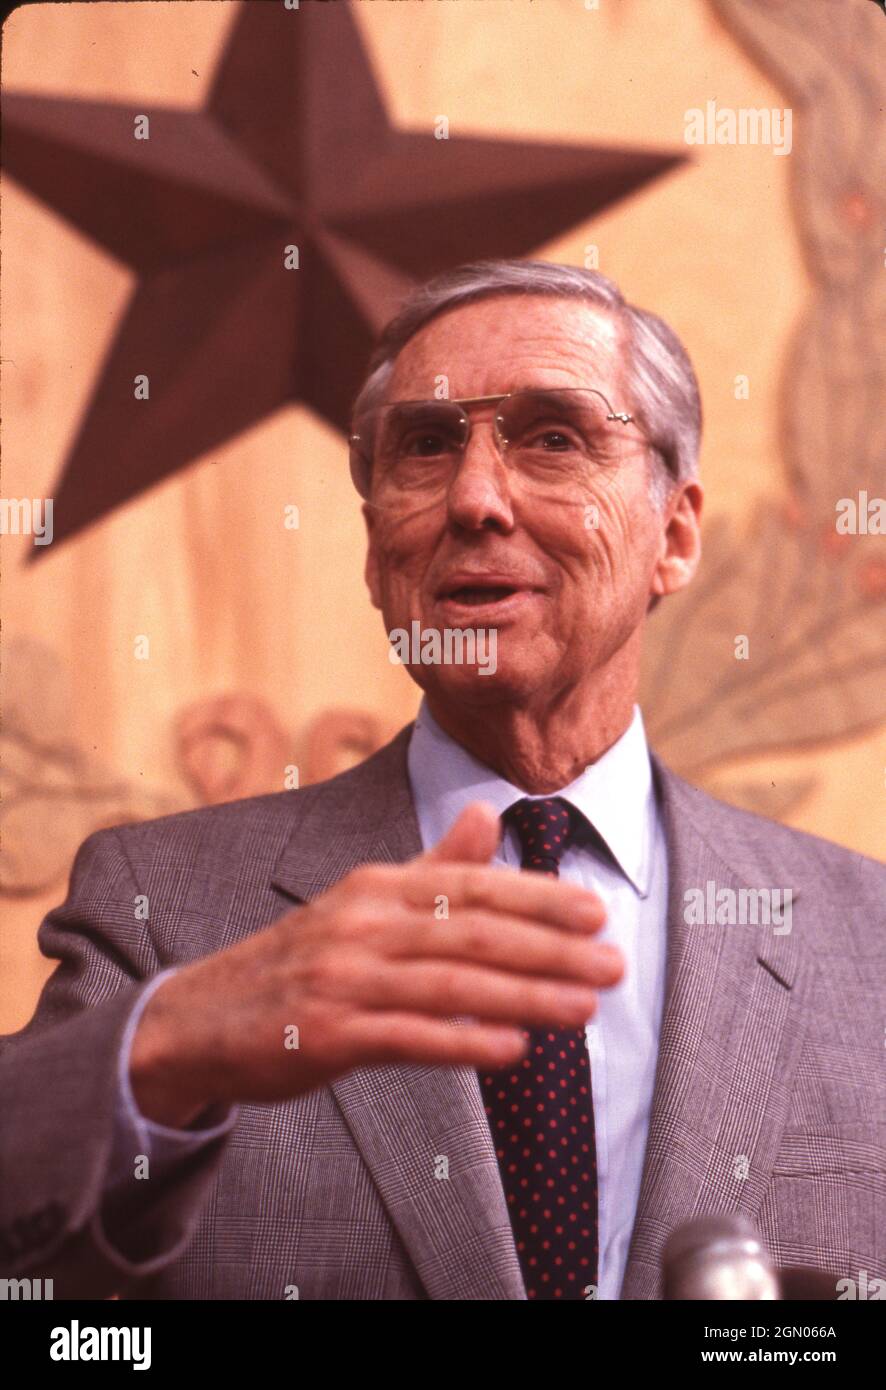 Austin Texas USA, 1987: U.S. Sen. LLOYD BENTSEN of Texas speaking at the Texas Capitol as chair of the Senate Finance Committee before he was picked in 1988 as the running mate to Democratic presidential nominee Michael Dukakis. ©Bob Daemmrich Stock Photo